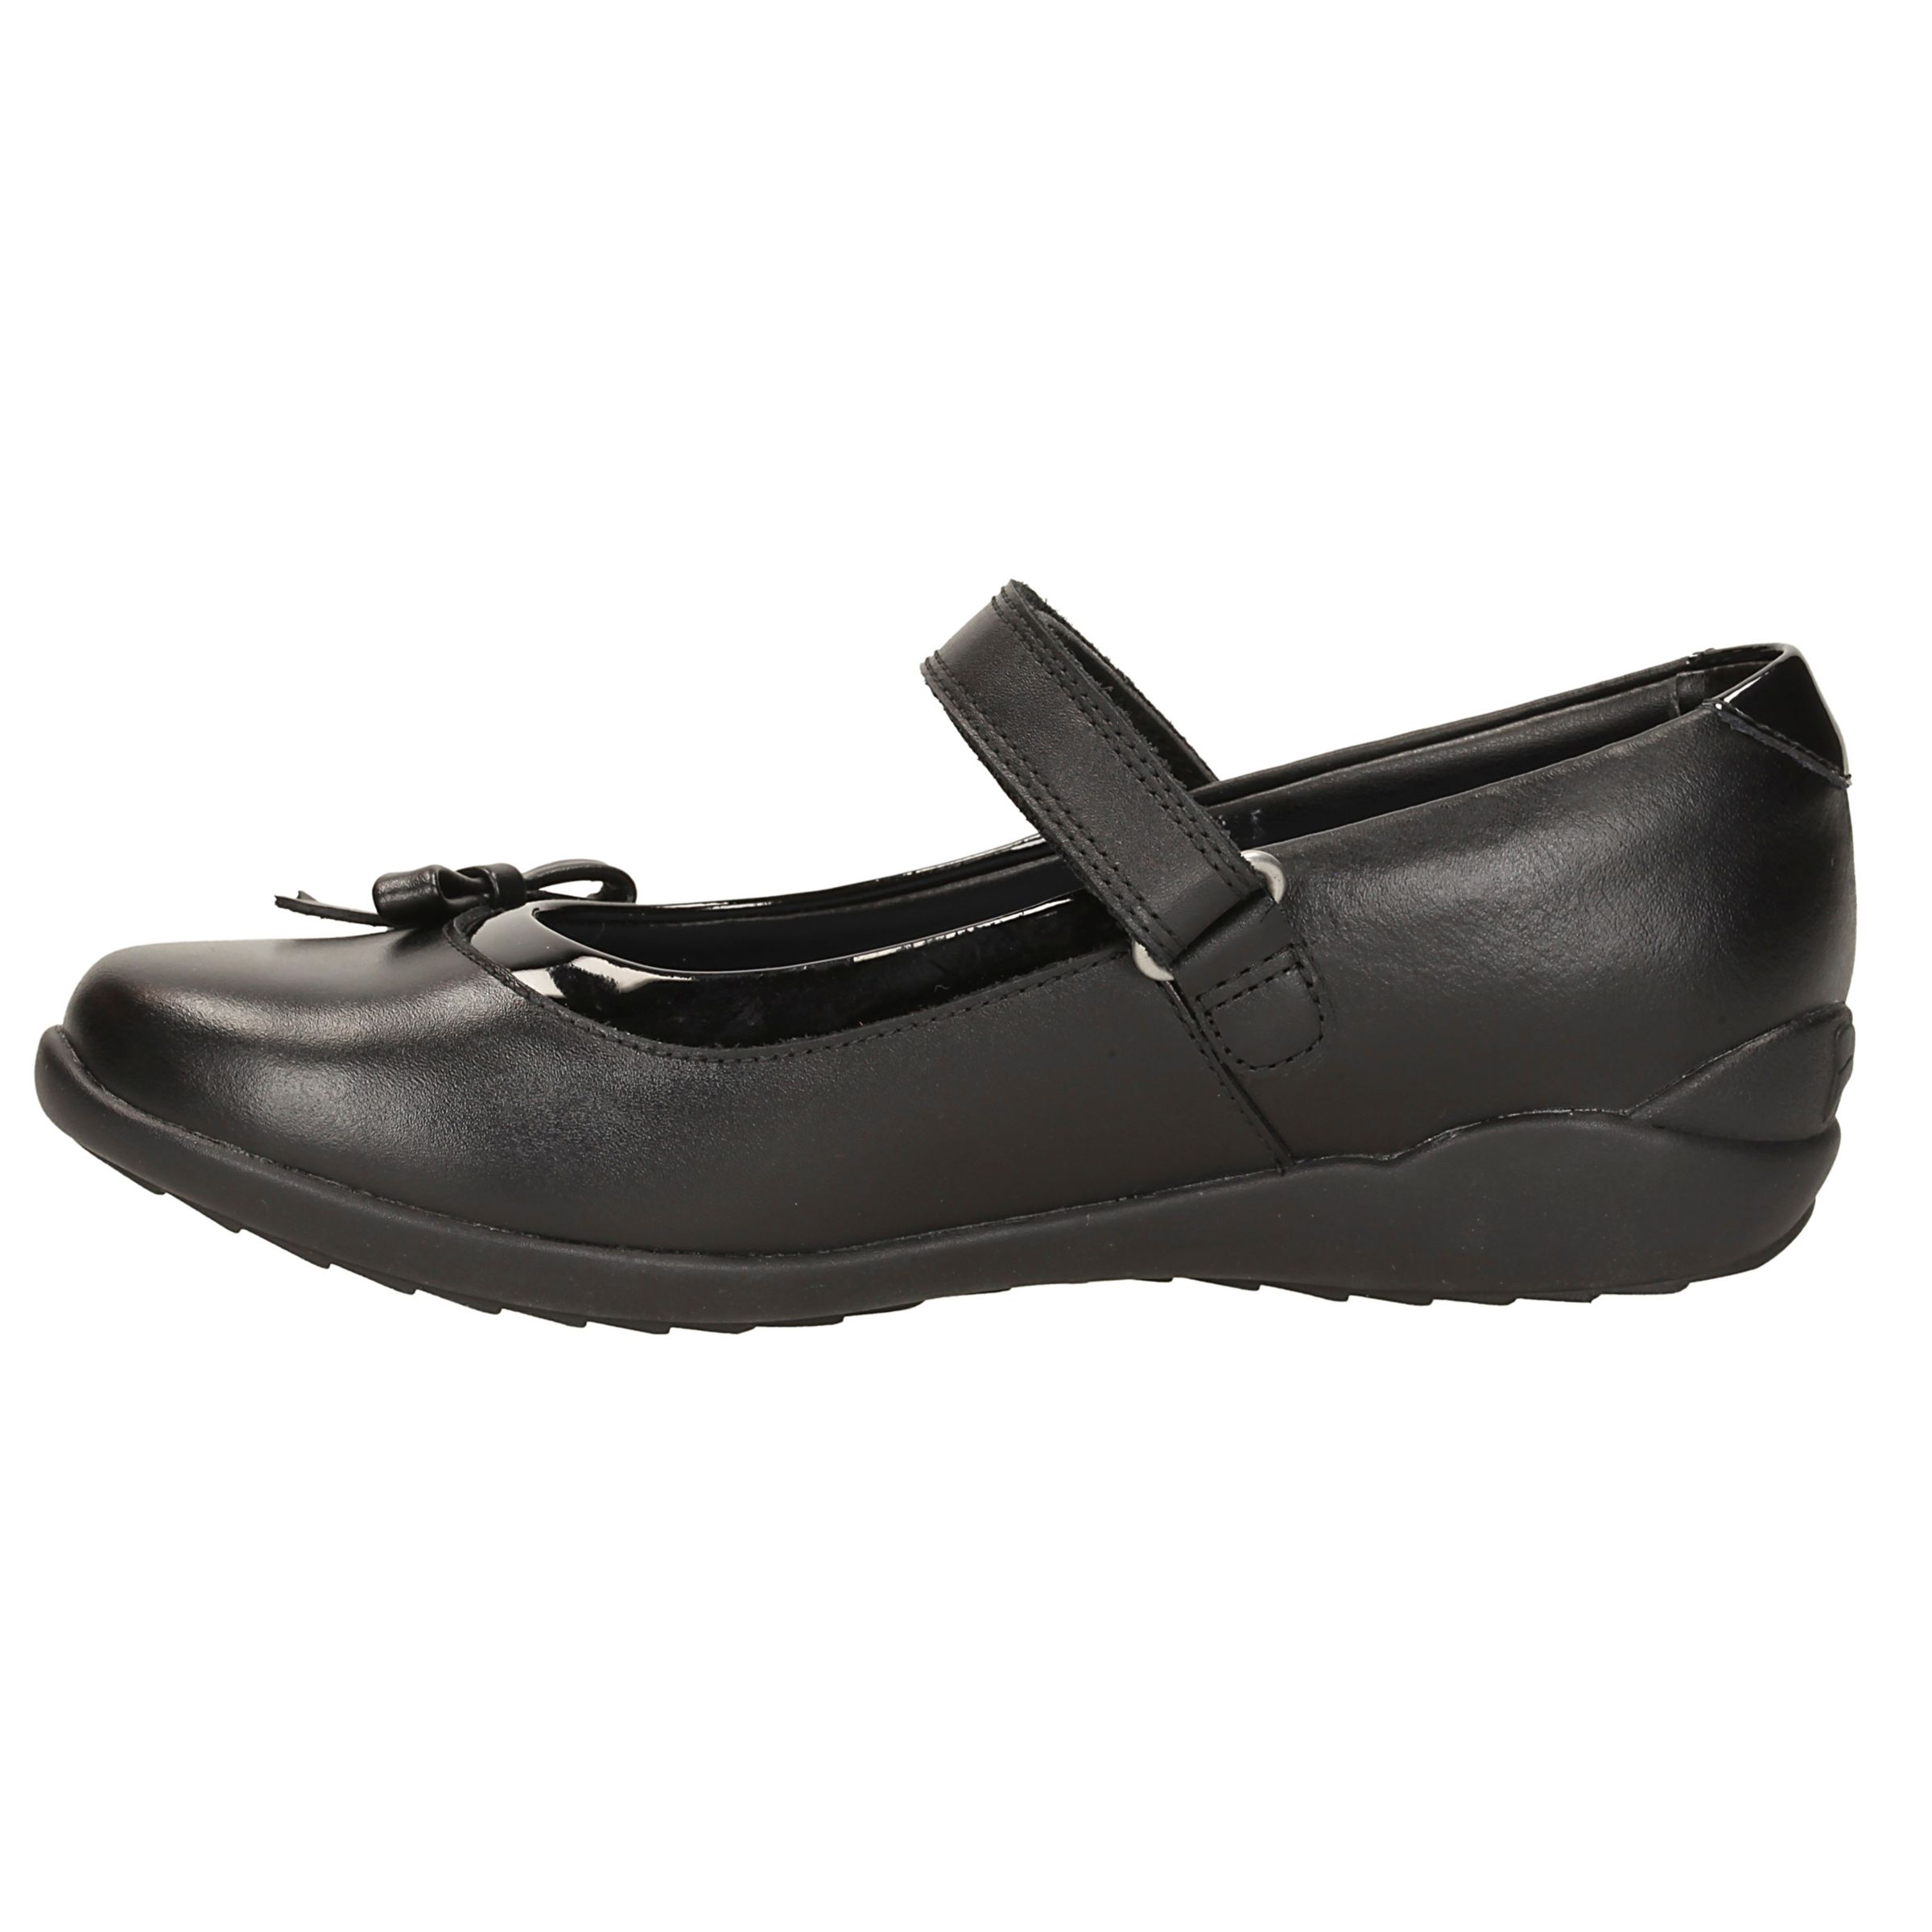 Girls Clarks School Shoes *Ting Fever*